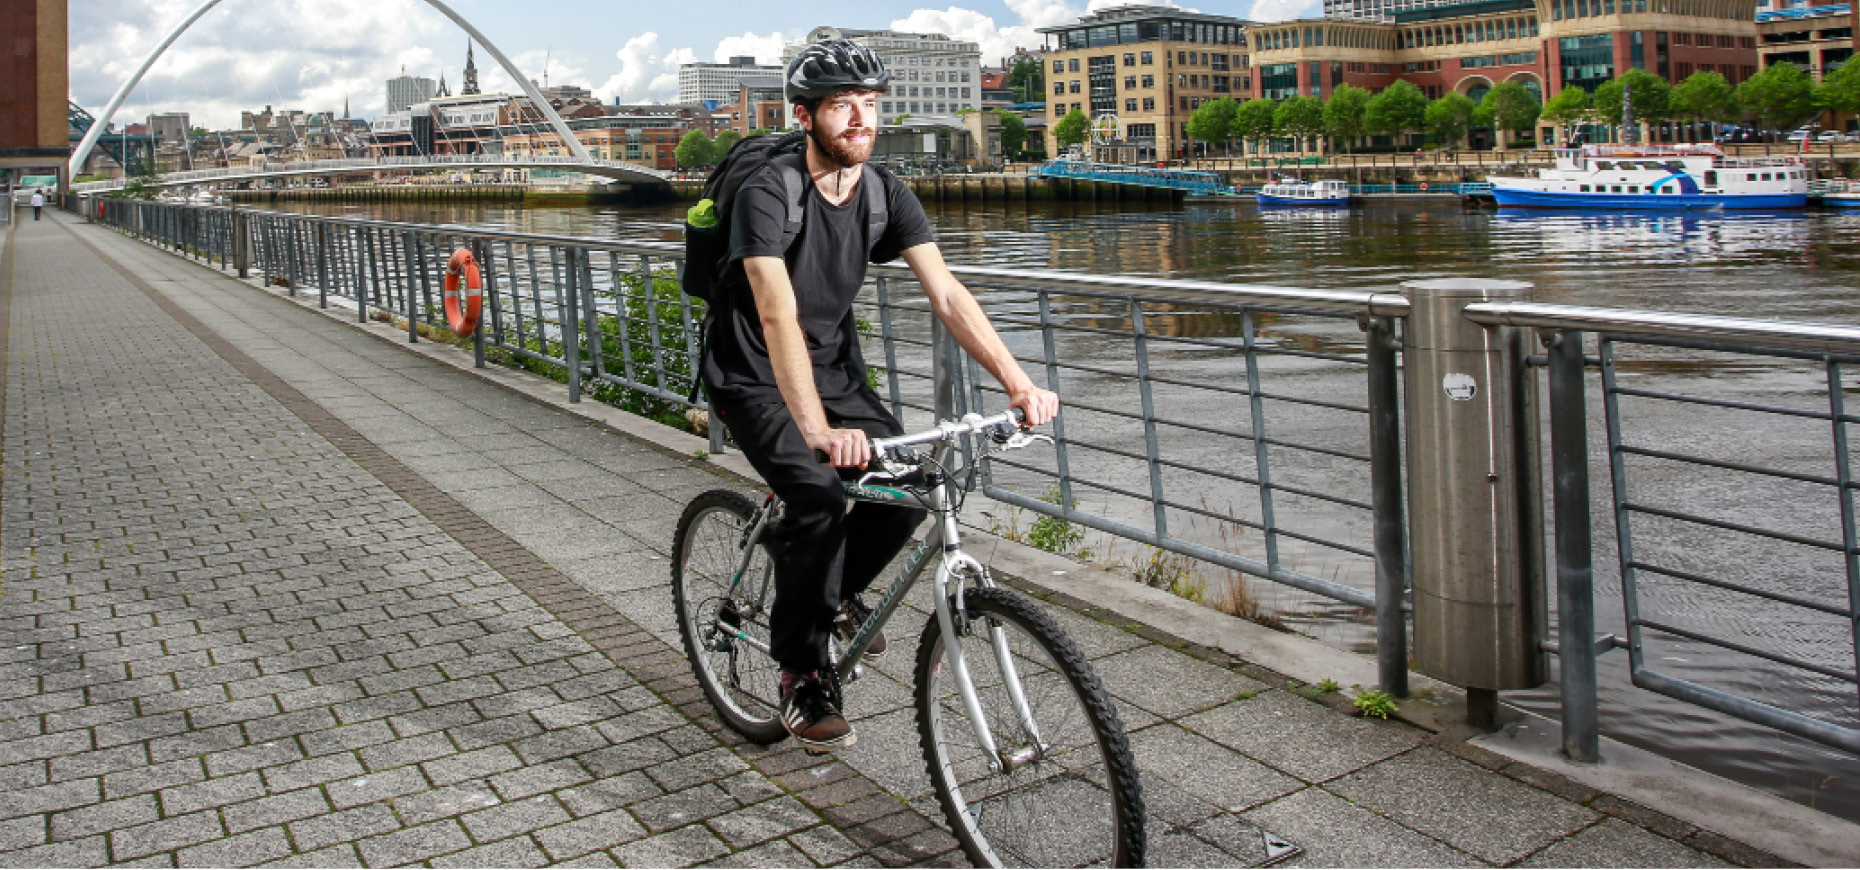 North East awarded £17.7m in funding for active travel